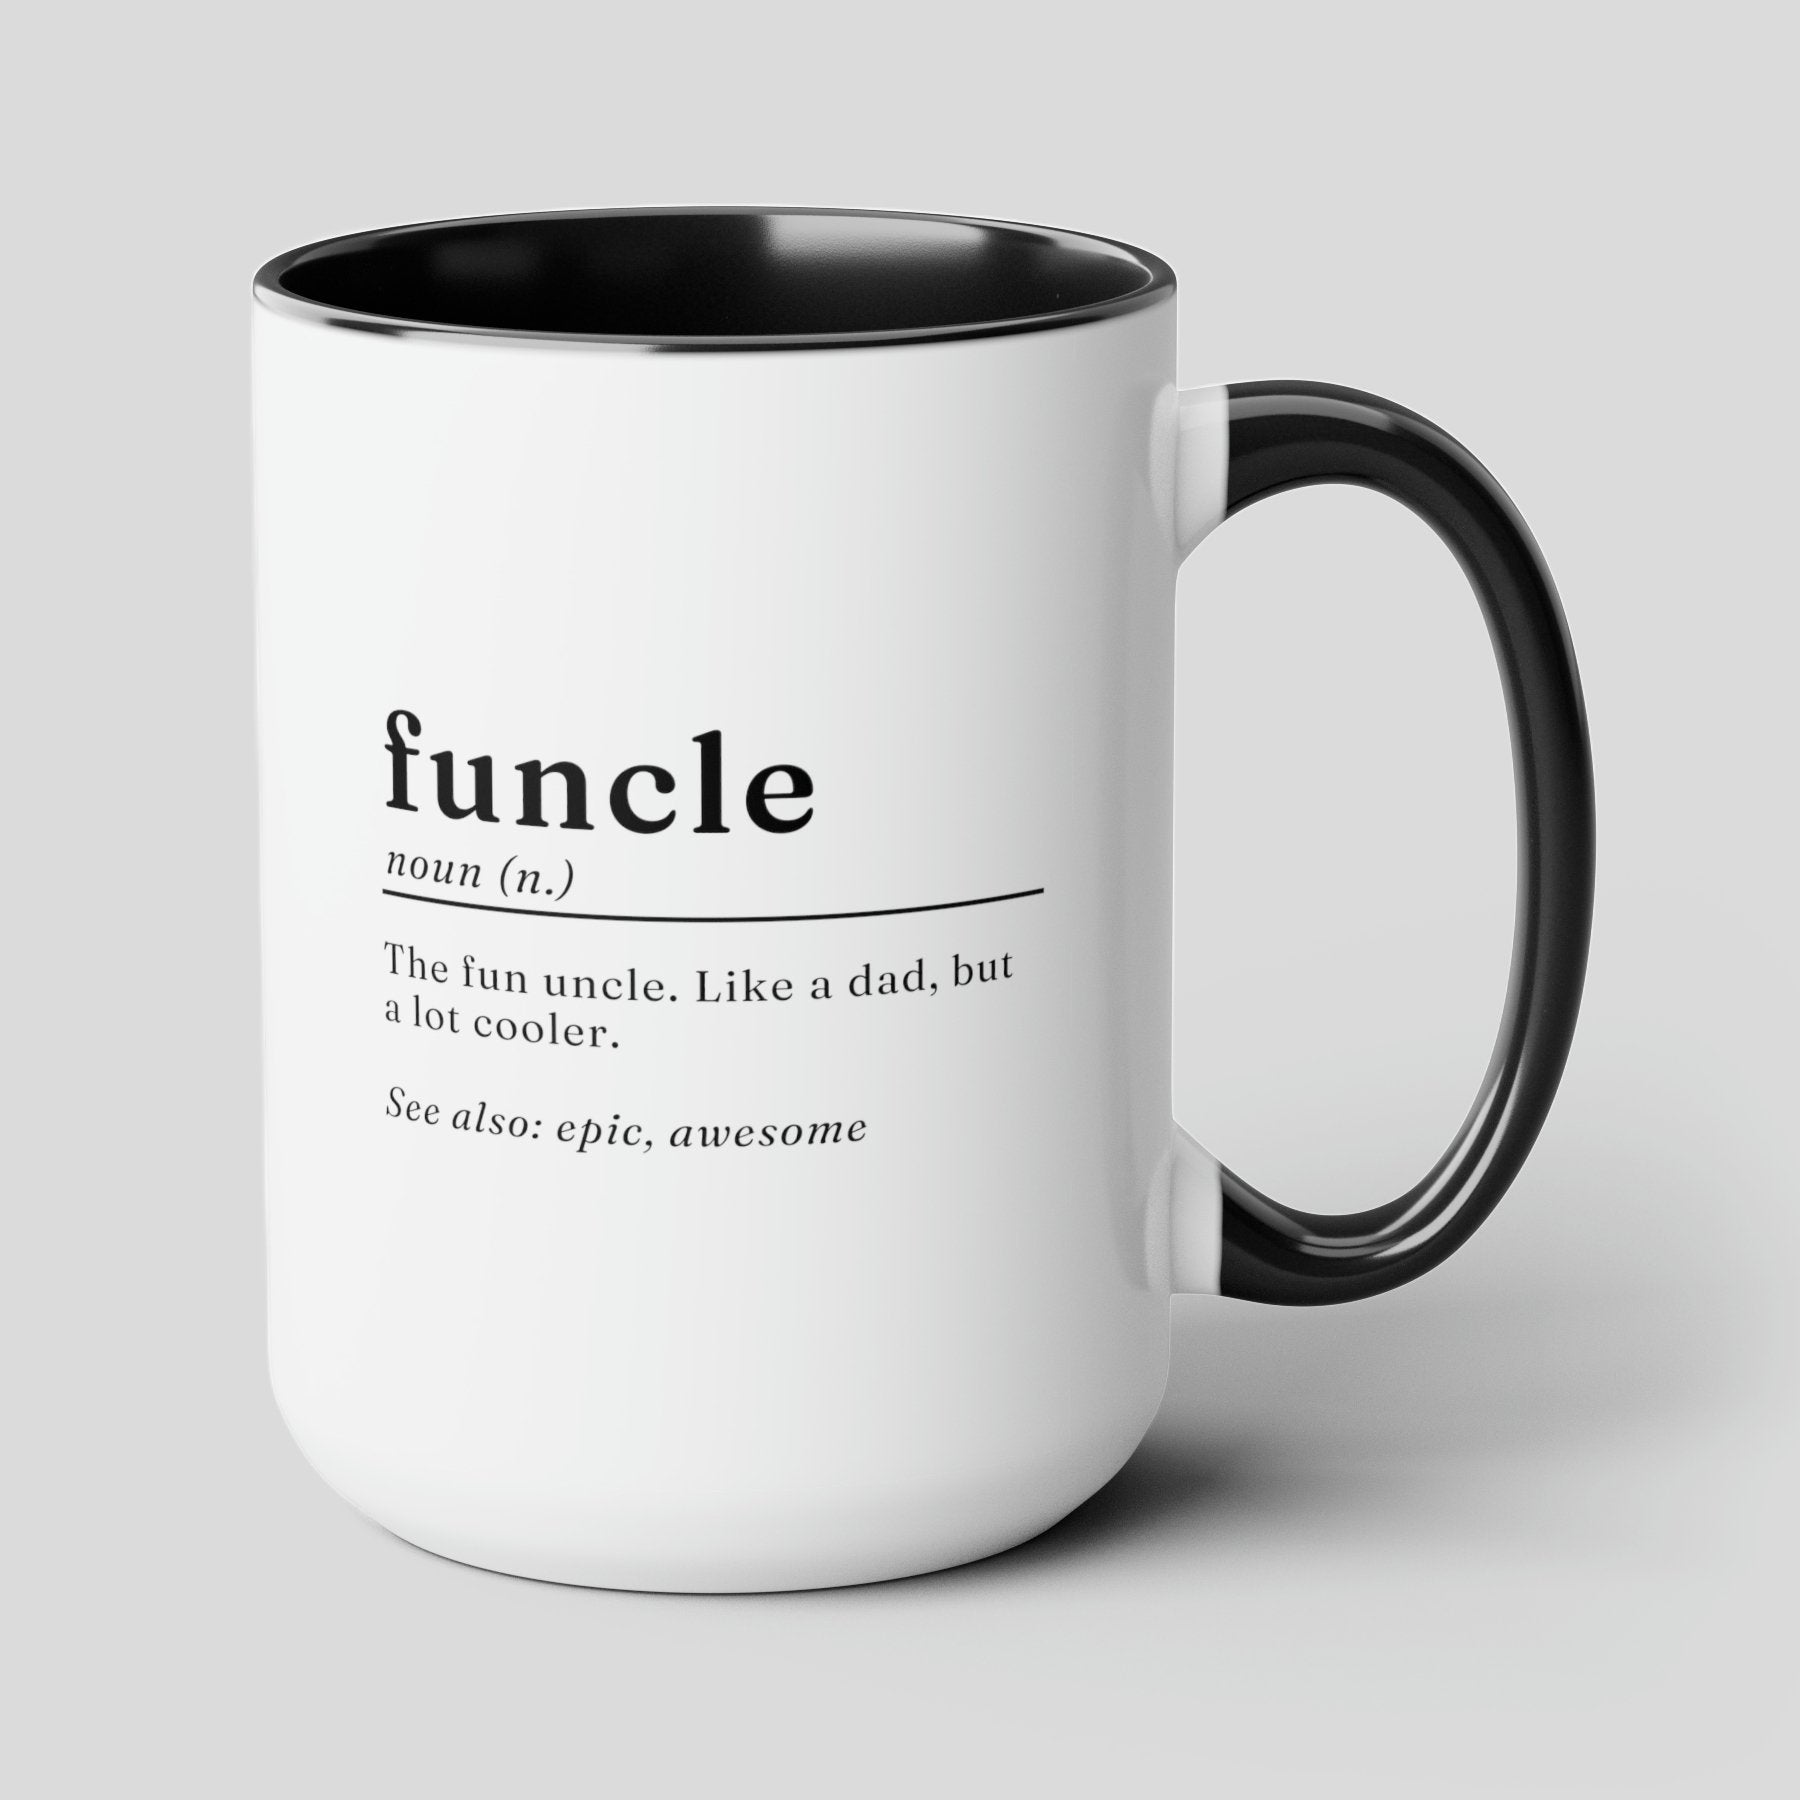 Funcle Definition 15oz white with black accent funny large coffee mug gift for fun uncle custom from niece nephew waveywares wavey wares wavywares wavy wares cover